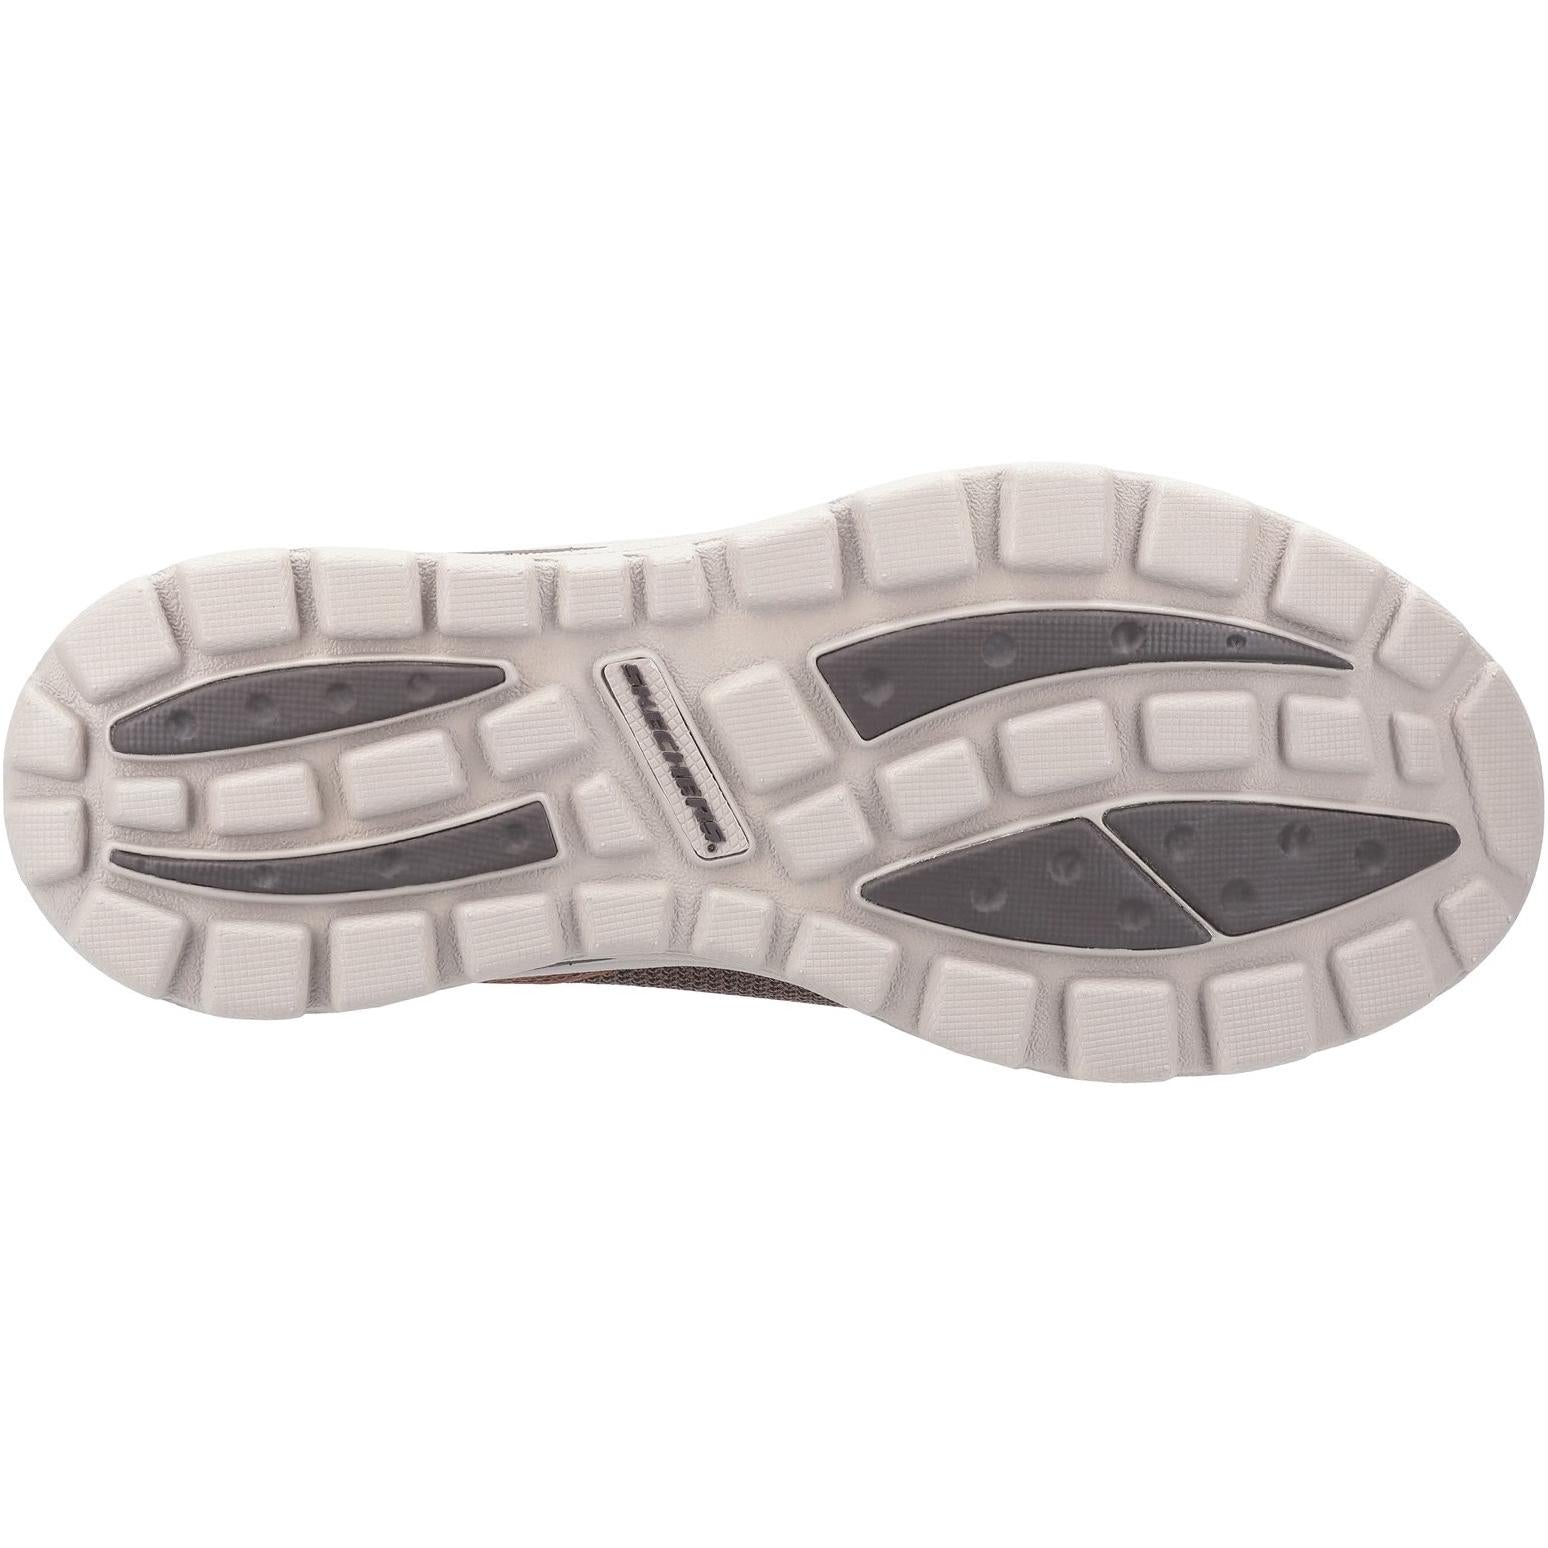 Skechers Superior Milford Shoes